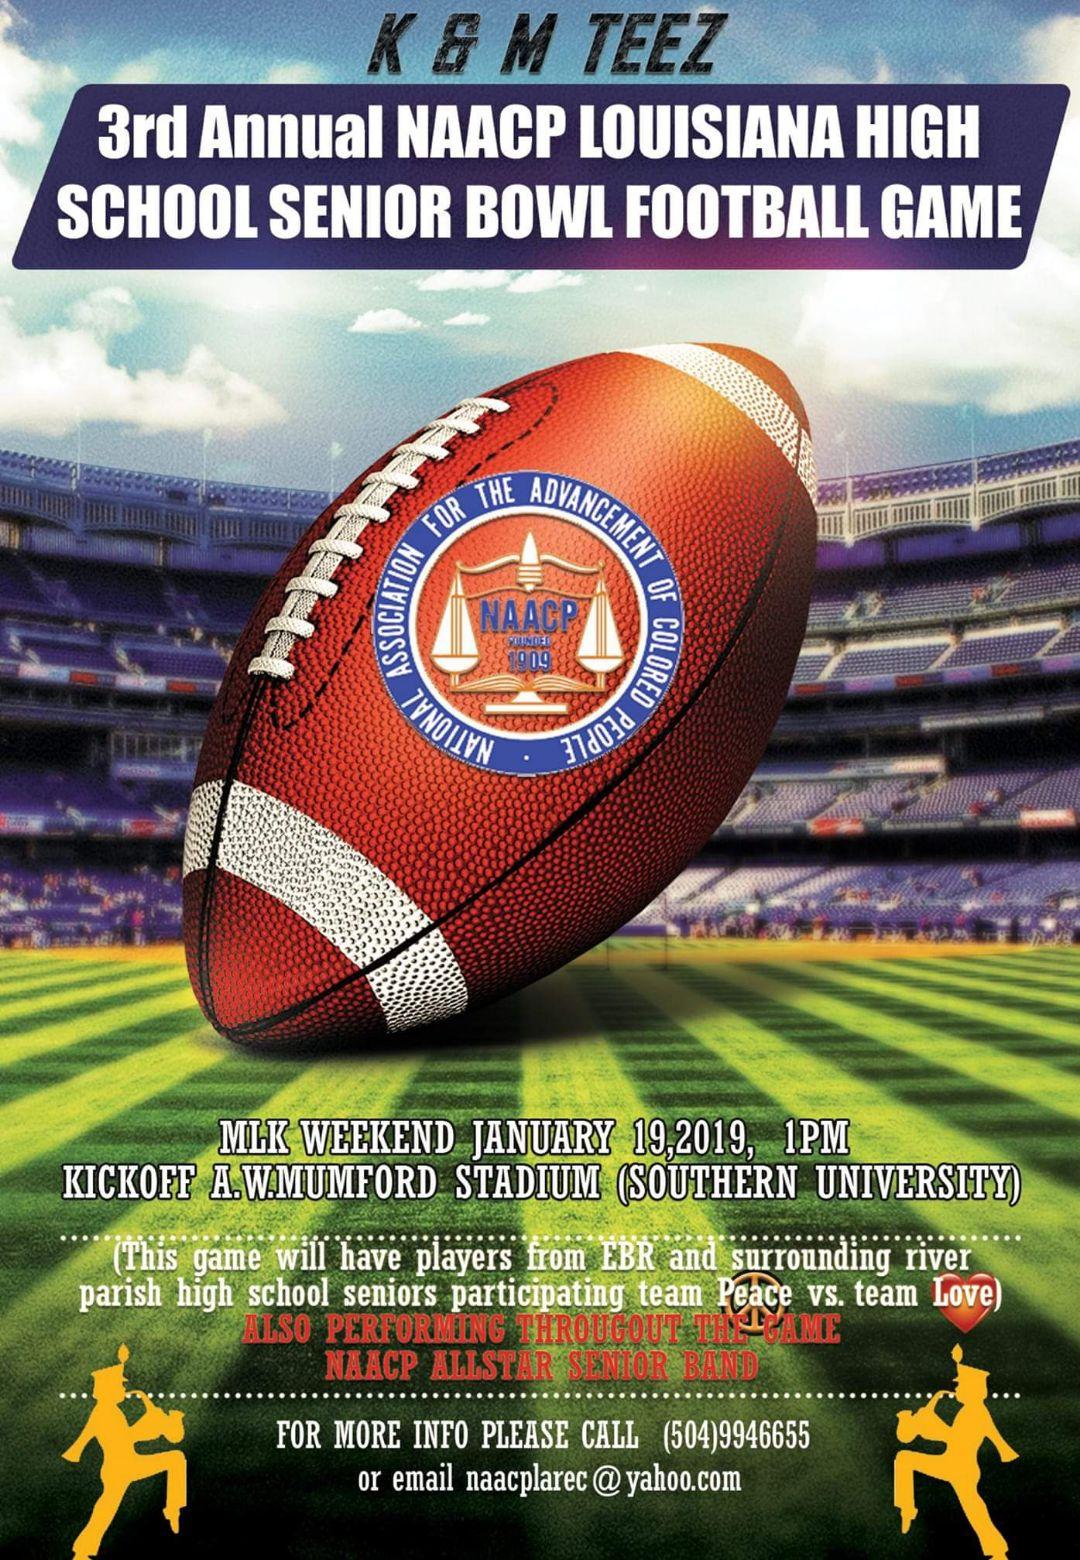  a photo of the poster advertising the 3rd Annual NCAAP Louisiana Senior Bowl